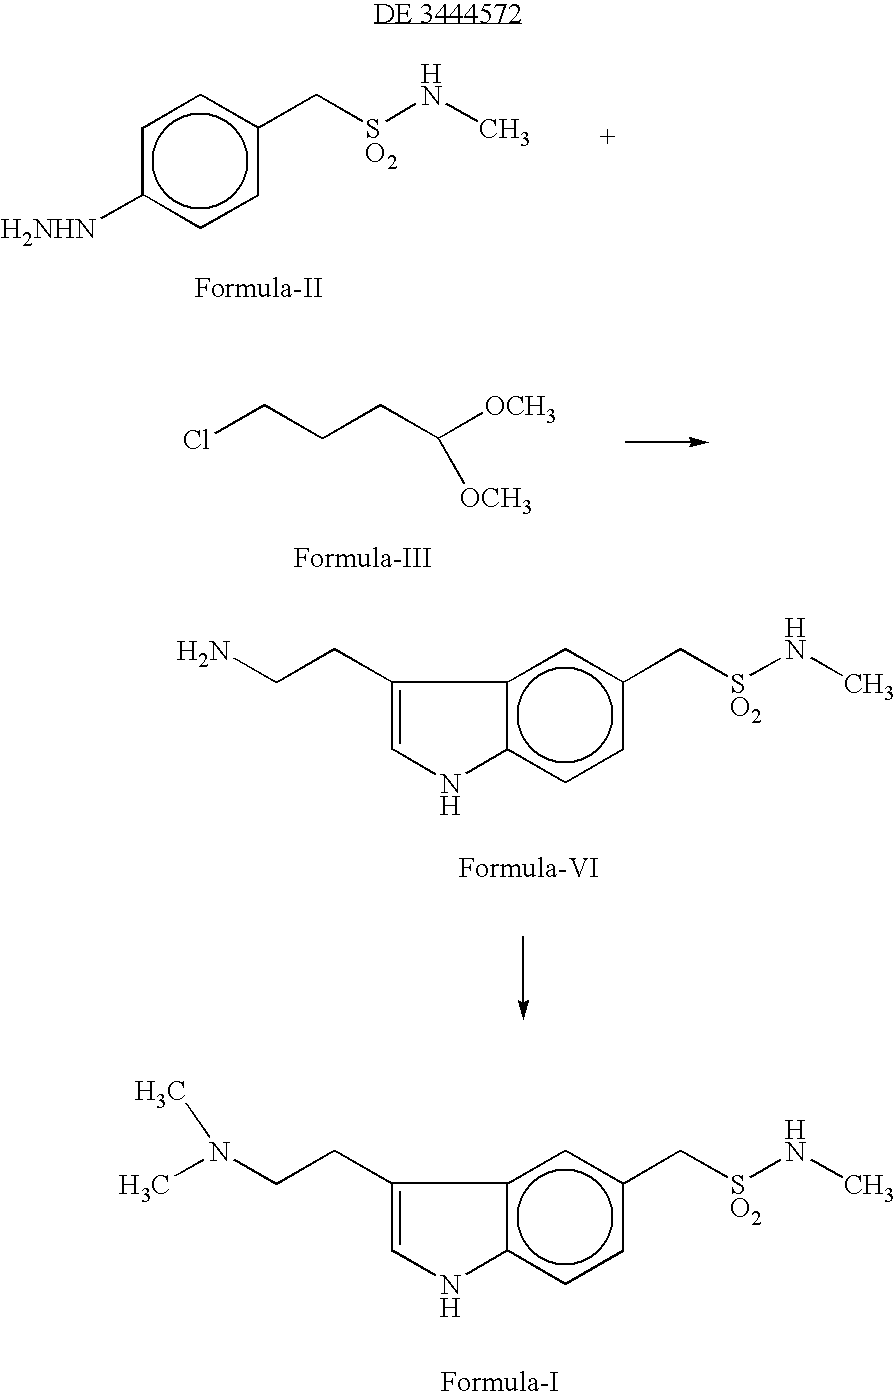 A novel process for preparation of indole derivatives